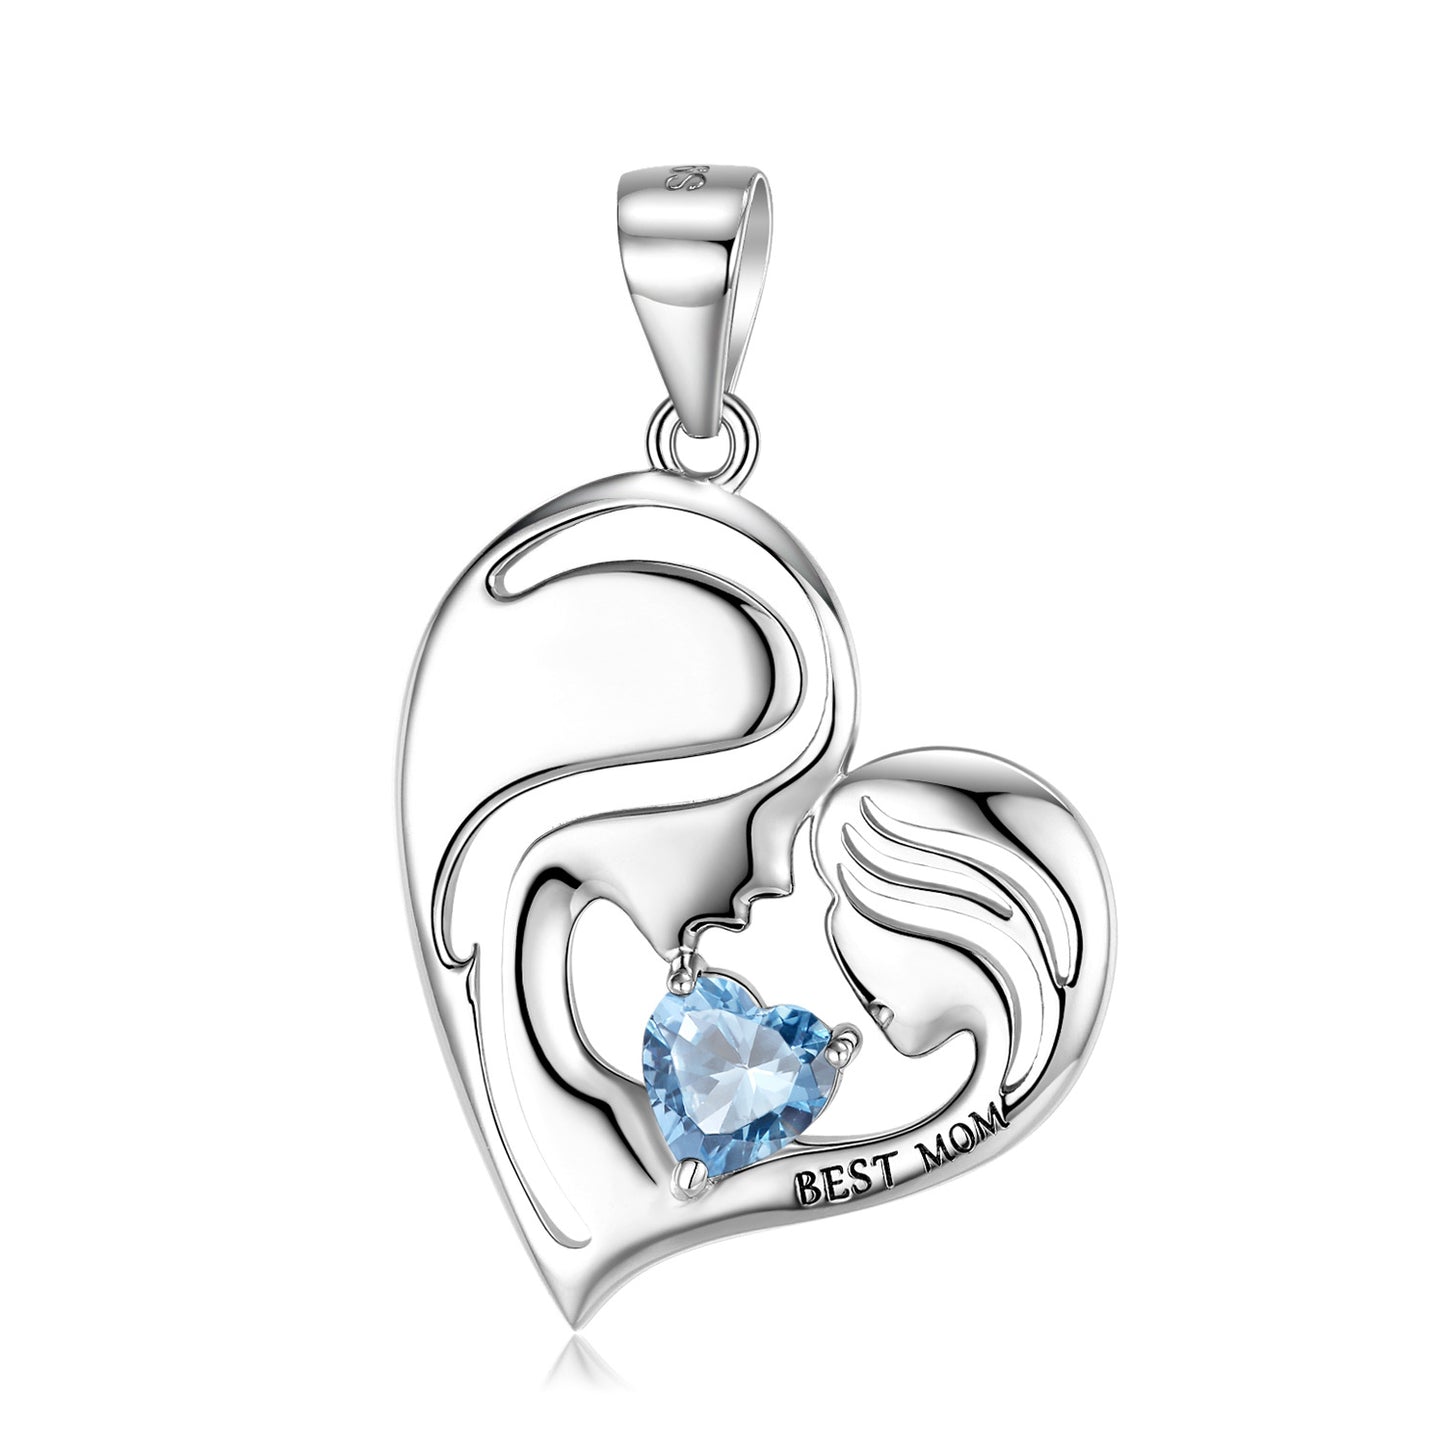 S925 Sterling Silver Best Mom Necklace